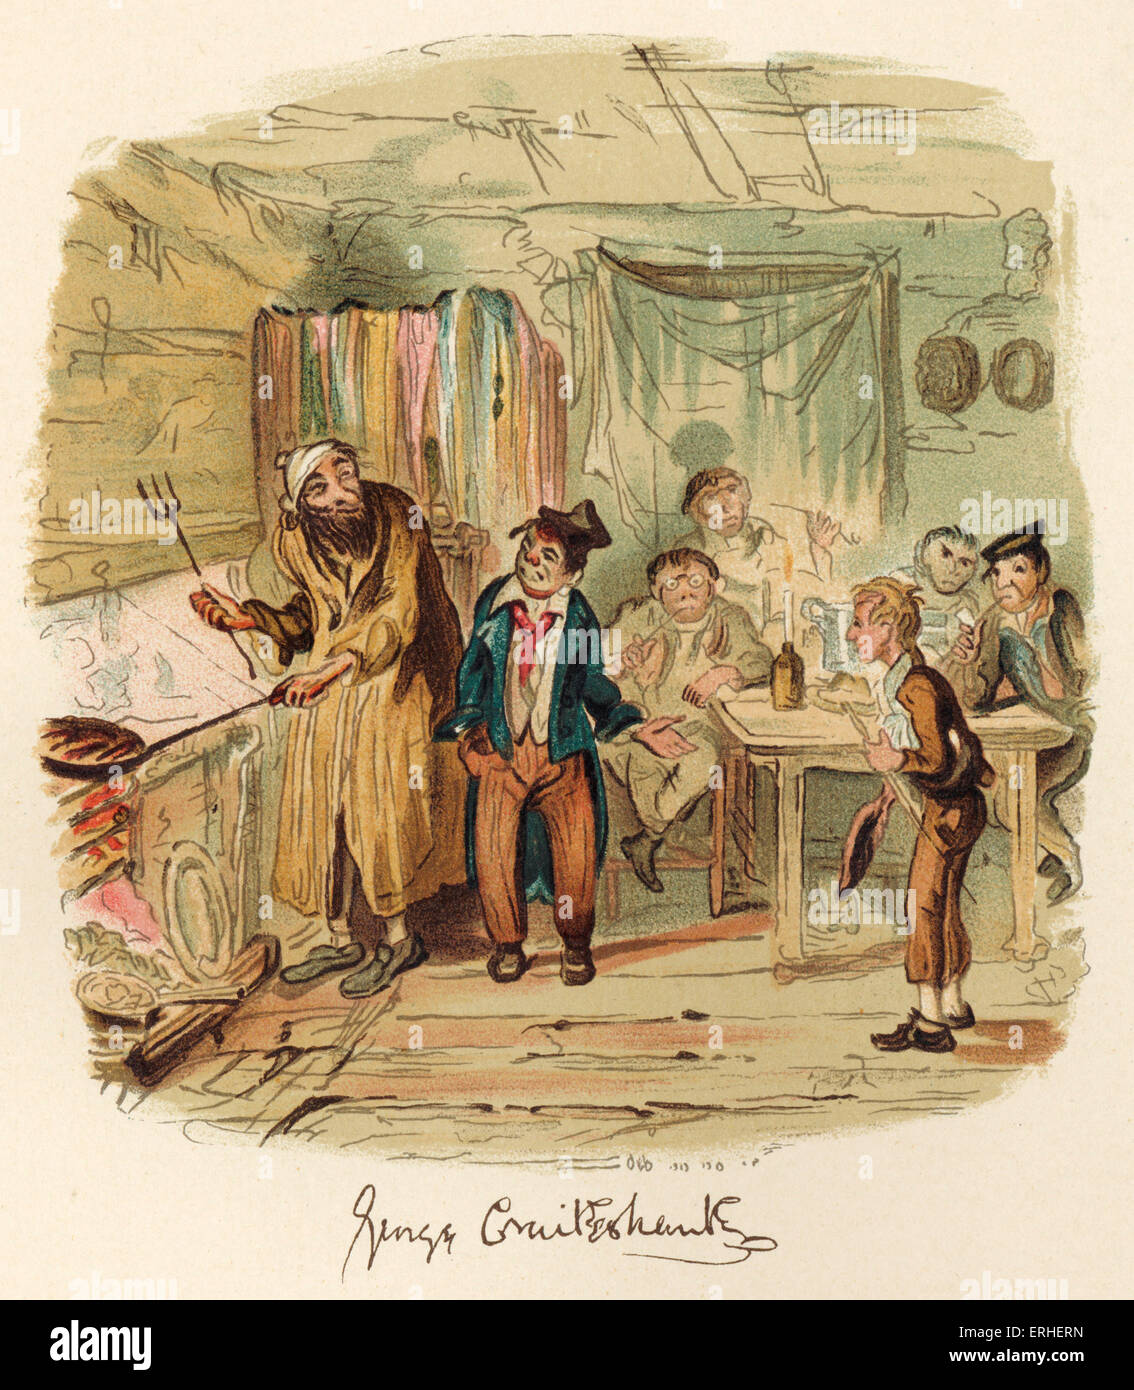 Charles Dickens' book 'Oliver Twist' illustration by George Cruikshank of Oliver  Twist with Fagin and his boys. English Stock Photo - Alamy